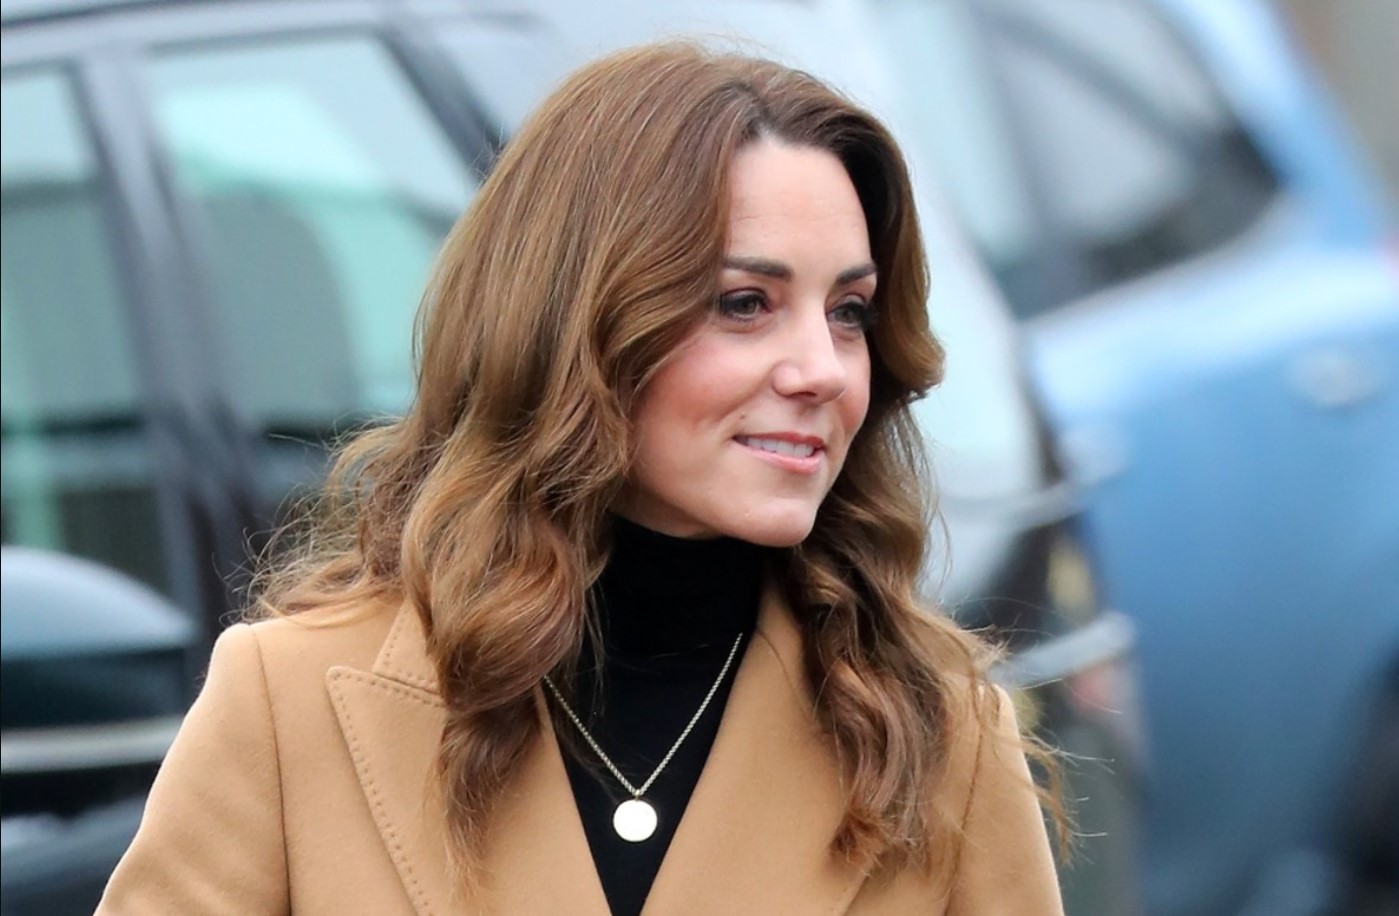 Kate Middleton’s Remarkable Recovery: Palace Dispels Coma Rumors After Abdominal Surgery